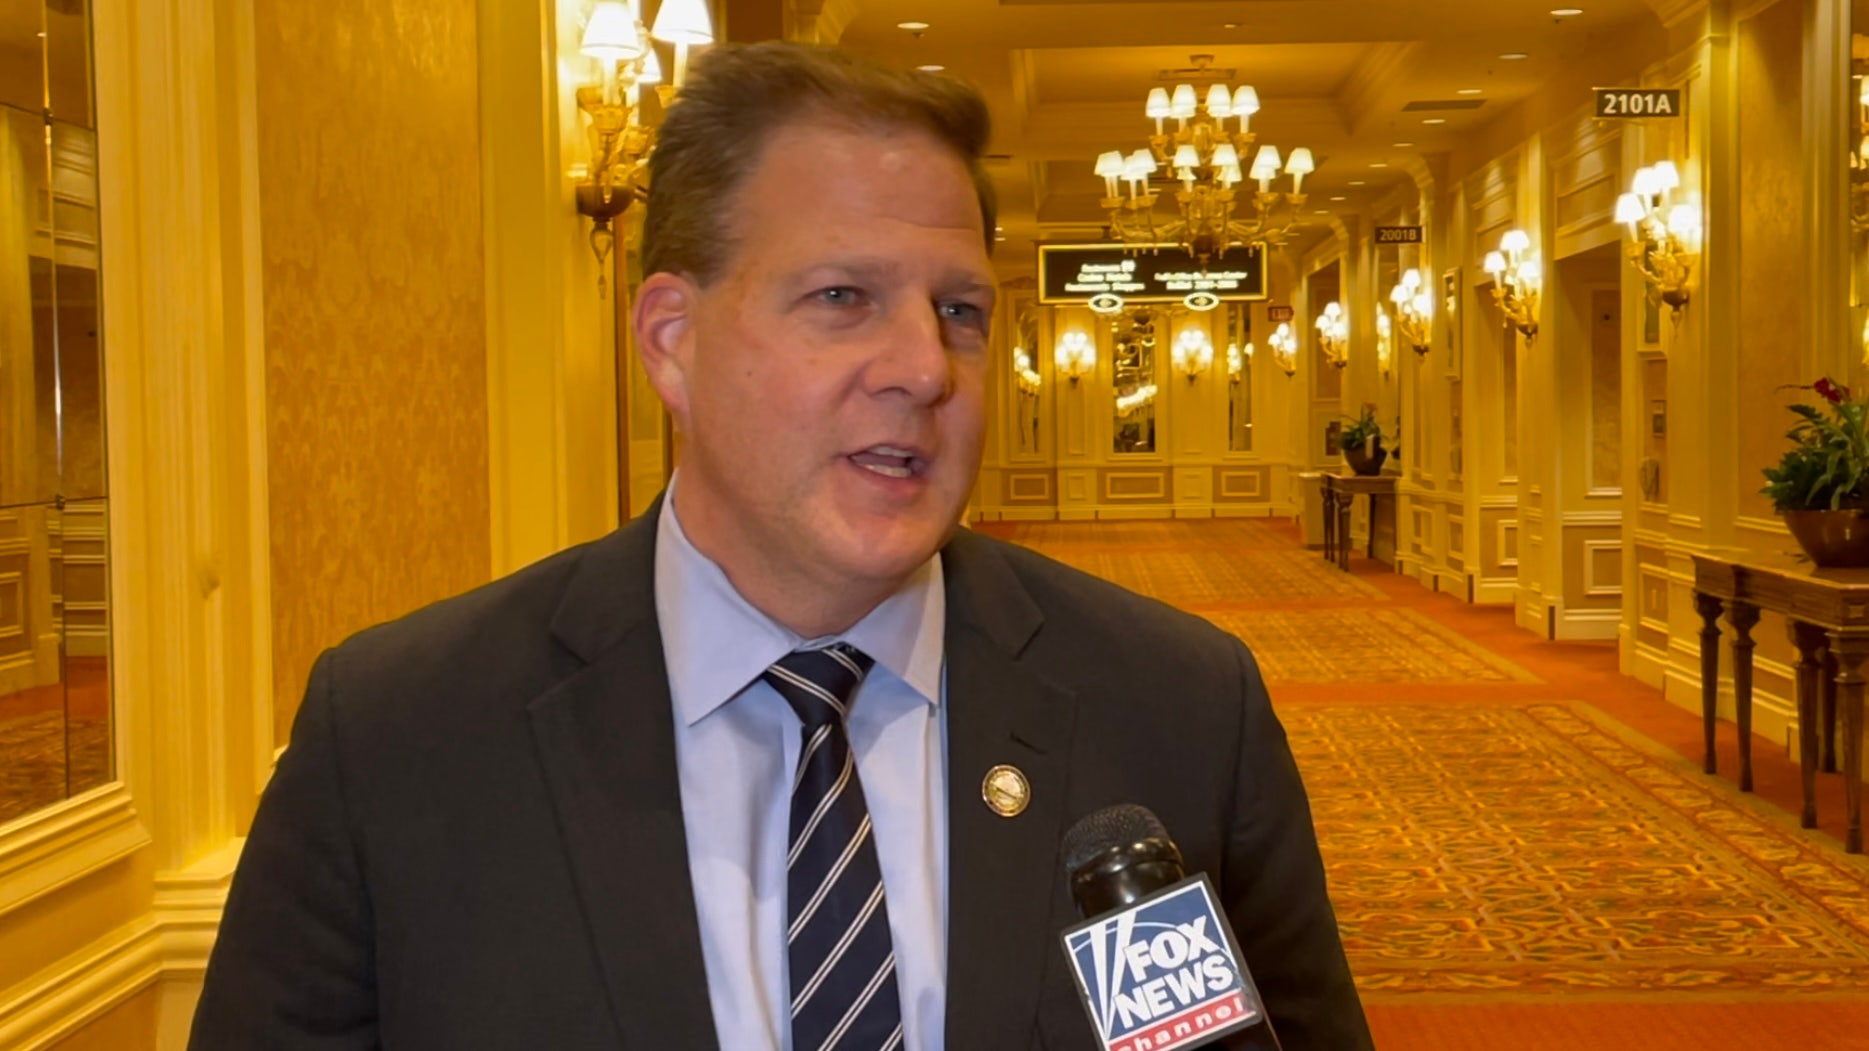 Trump adviser says former president hungry for someone to primary challenge NH GOP Gov. Sununu